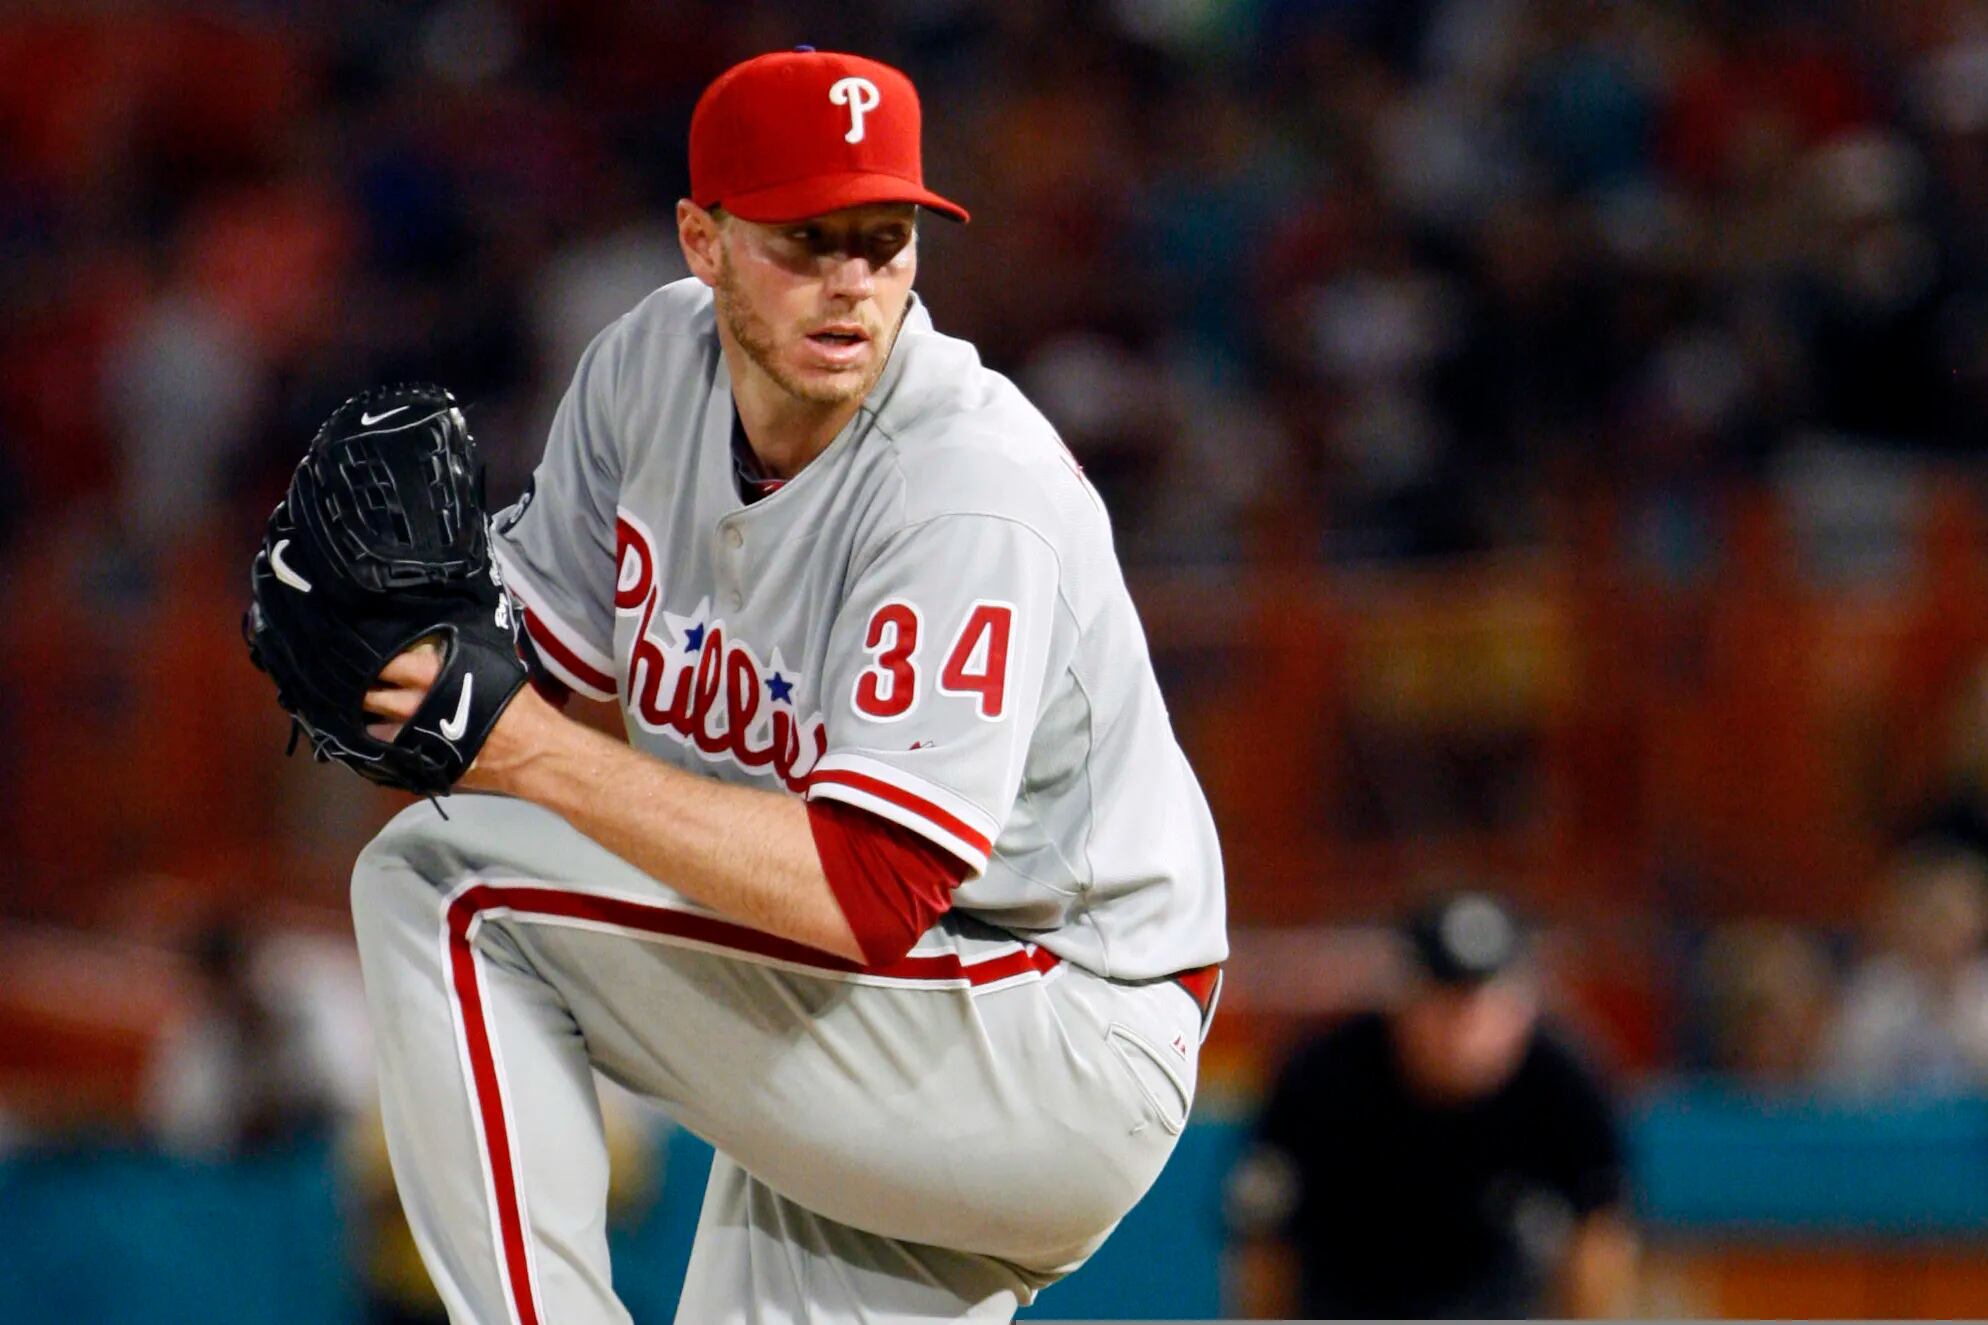 He Exemplified The Best': Cole Hamels Remembers Roy Halladay